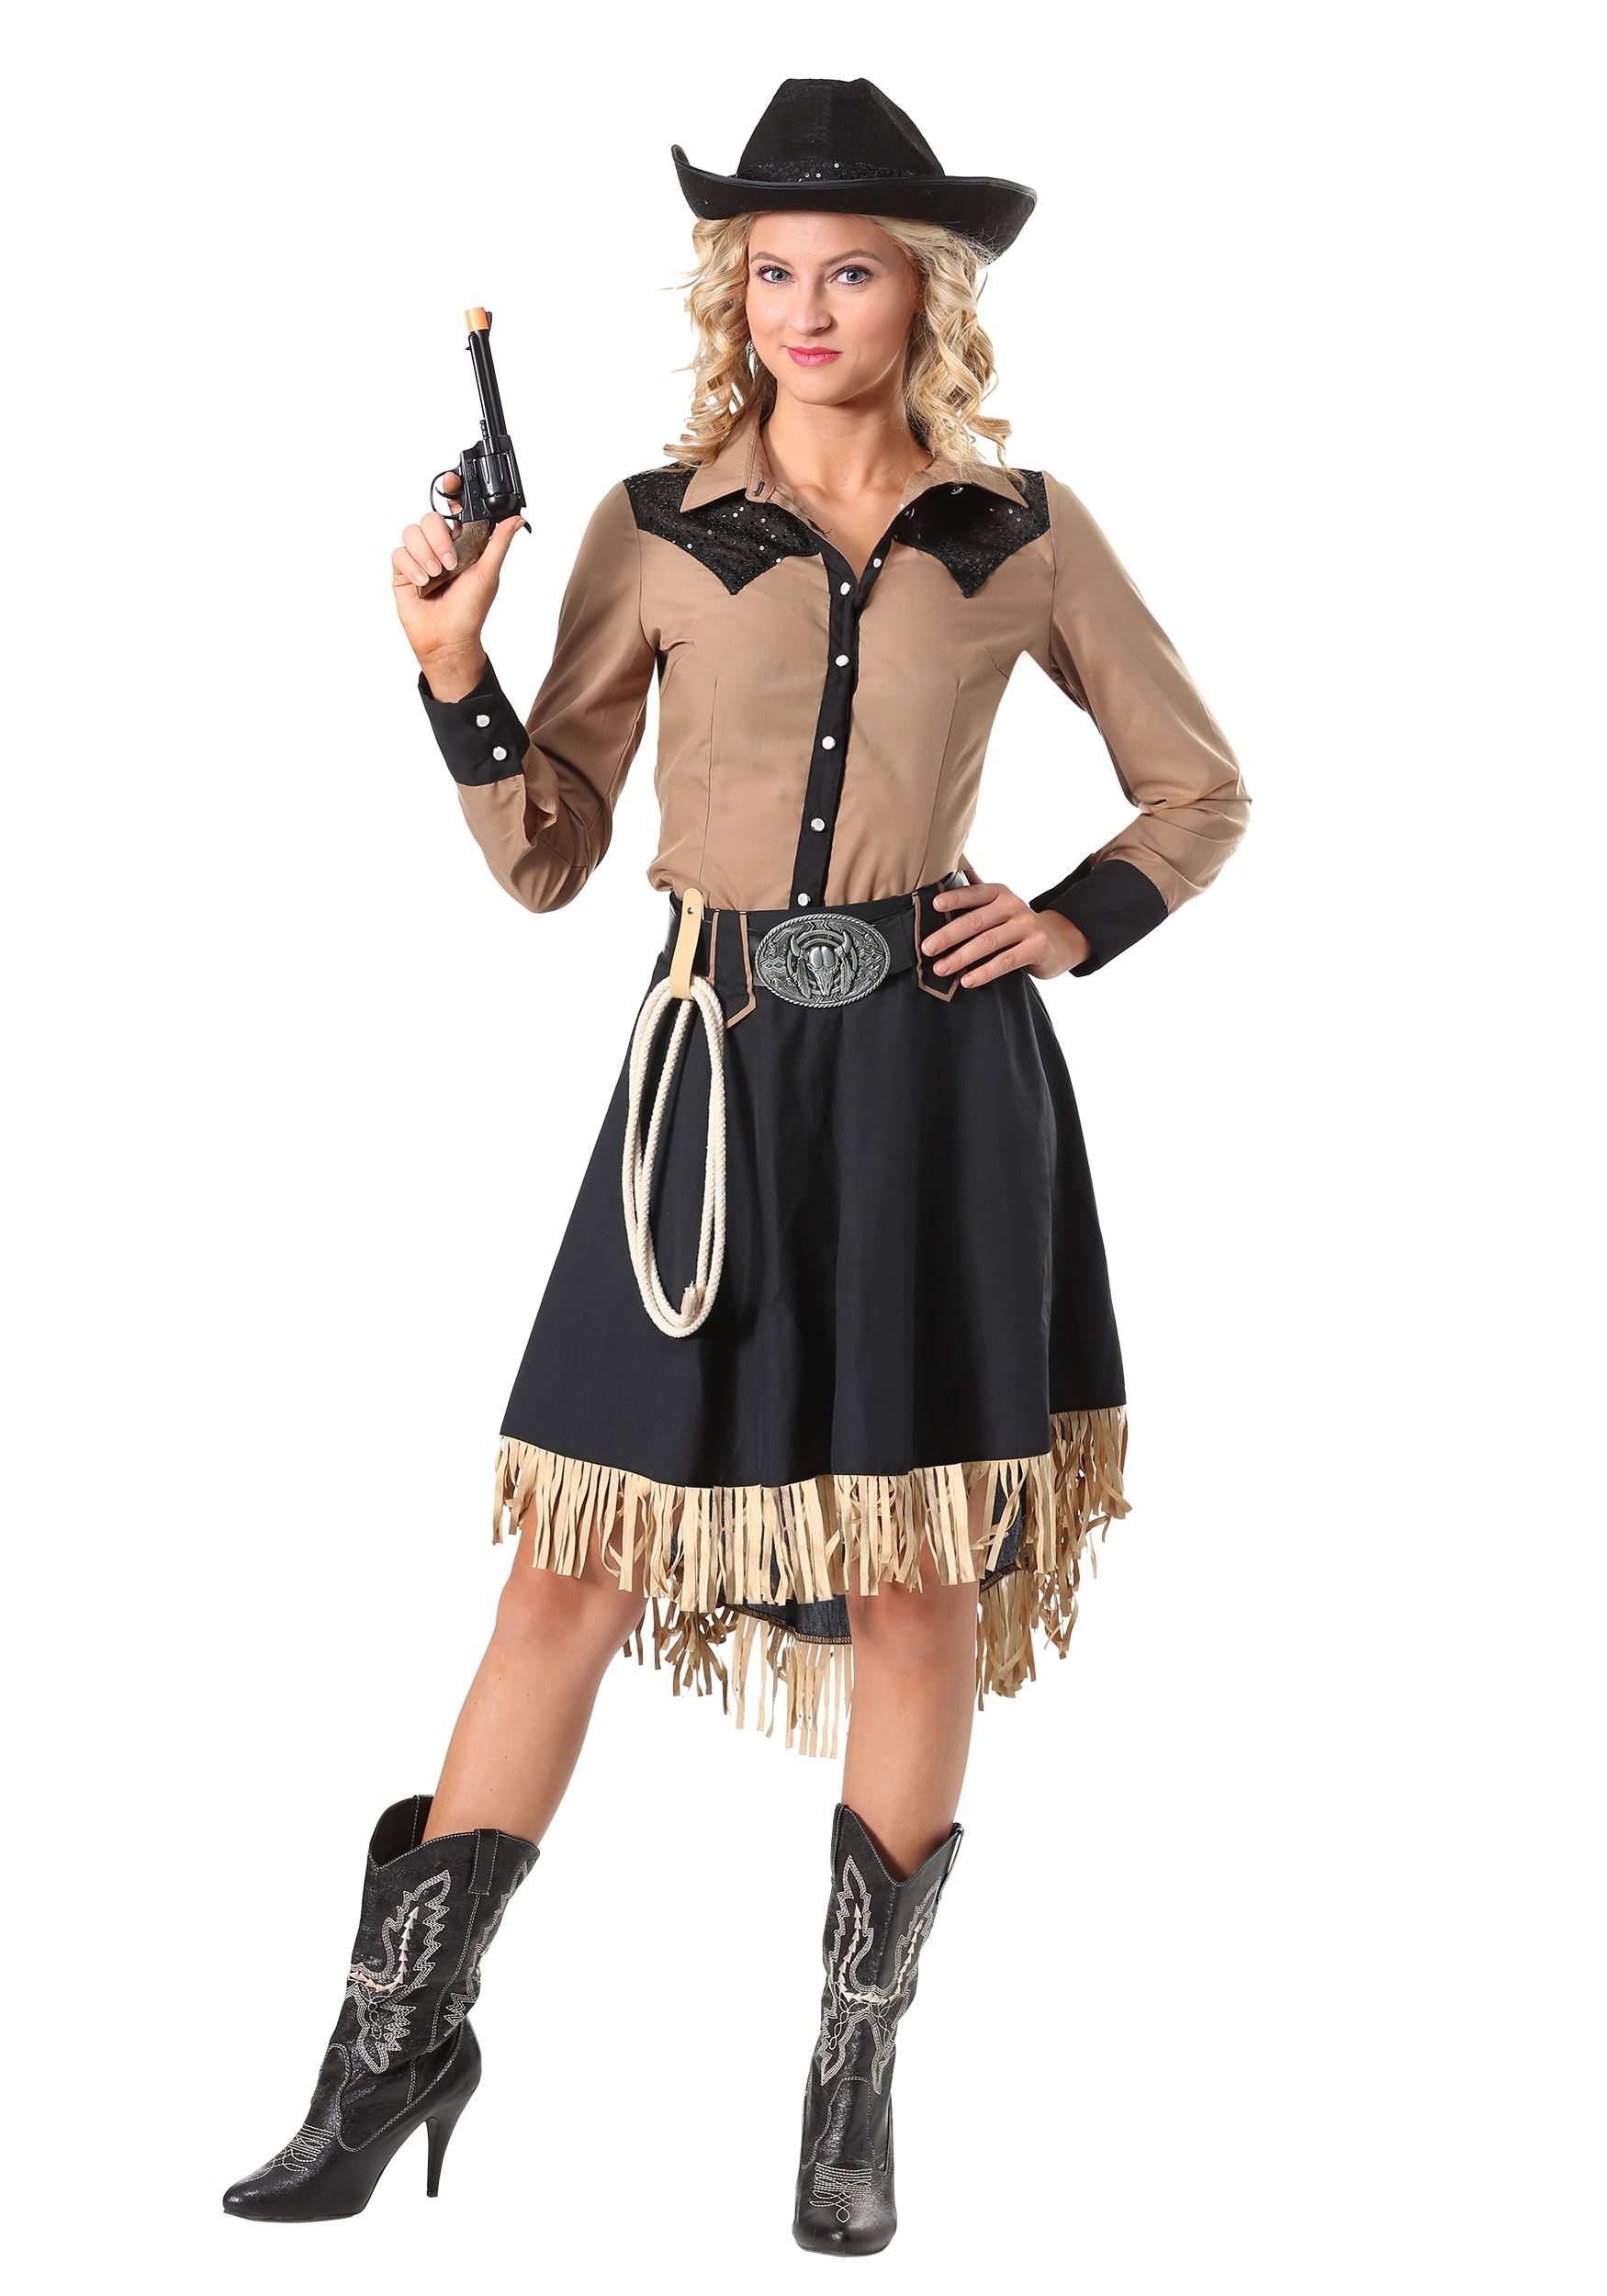 Shop Cowgirl Western Costumes for Women - www.